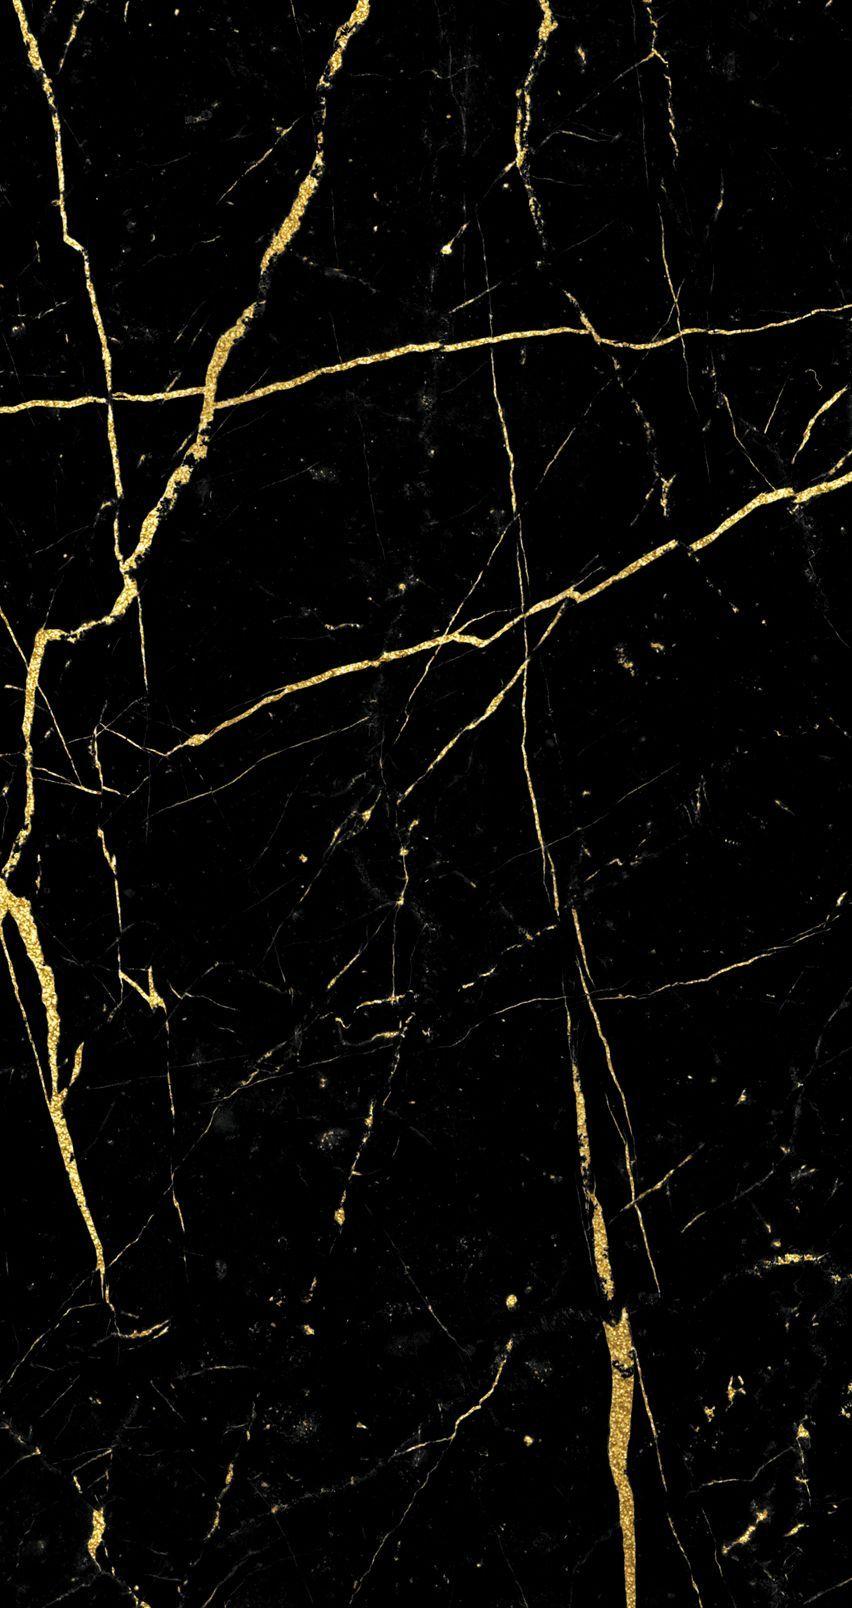 Wallpaper_ 852×608 pixels. Marble iphone wallpaper, Marble wallpaper hd, Black and gold marble